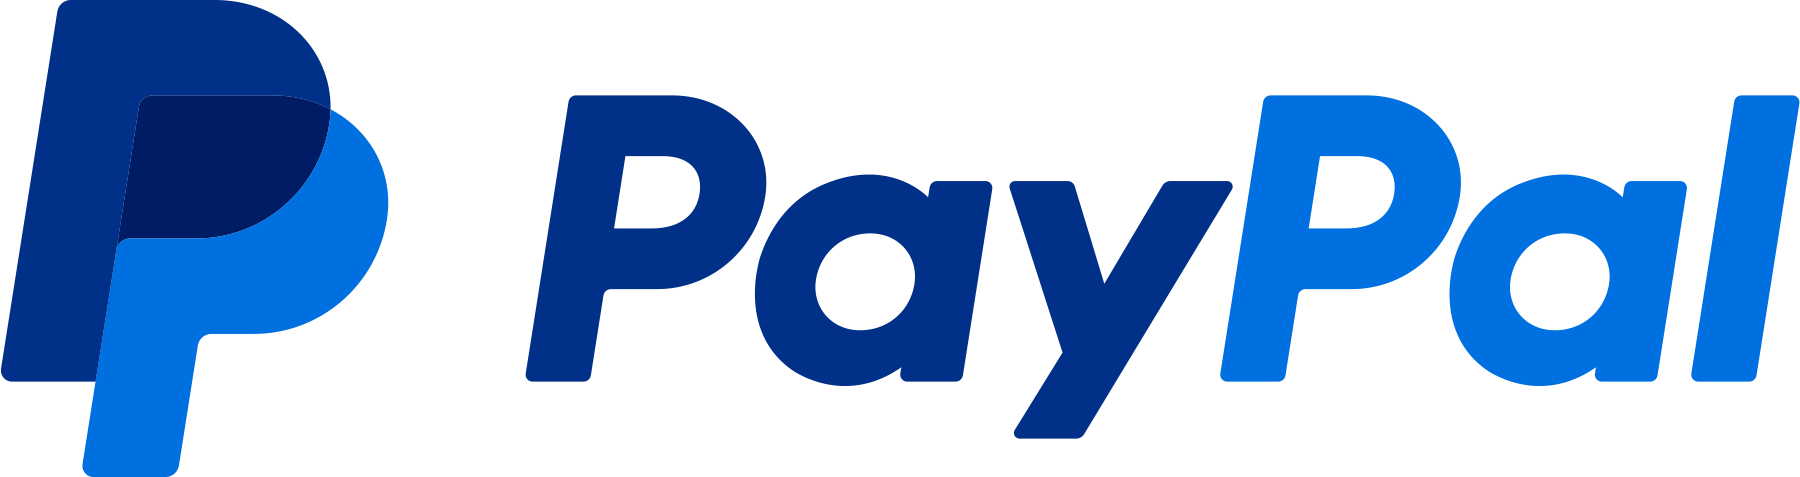 Paypal logo. click to visit their site